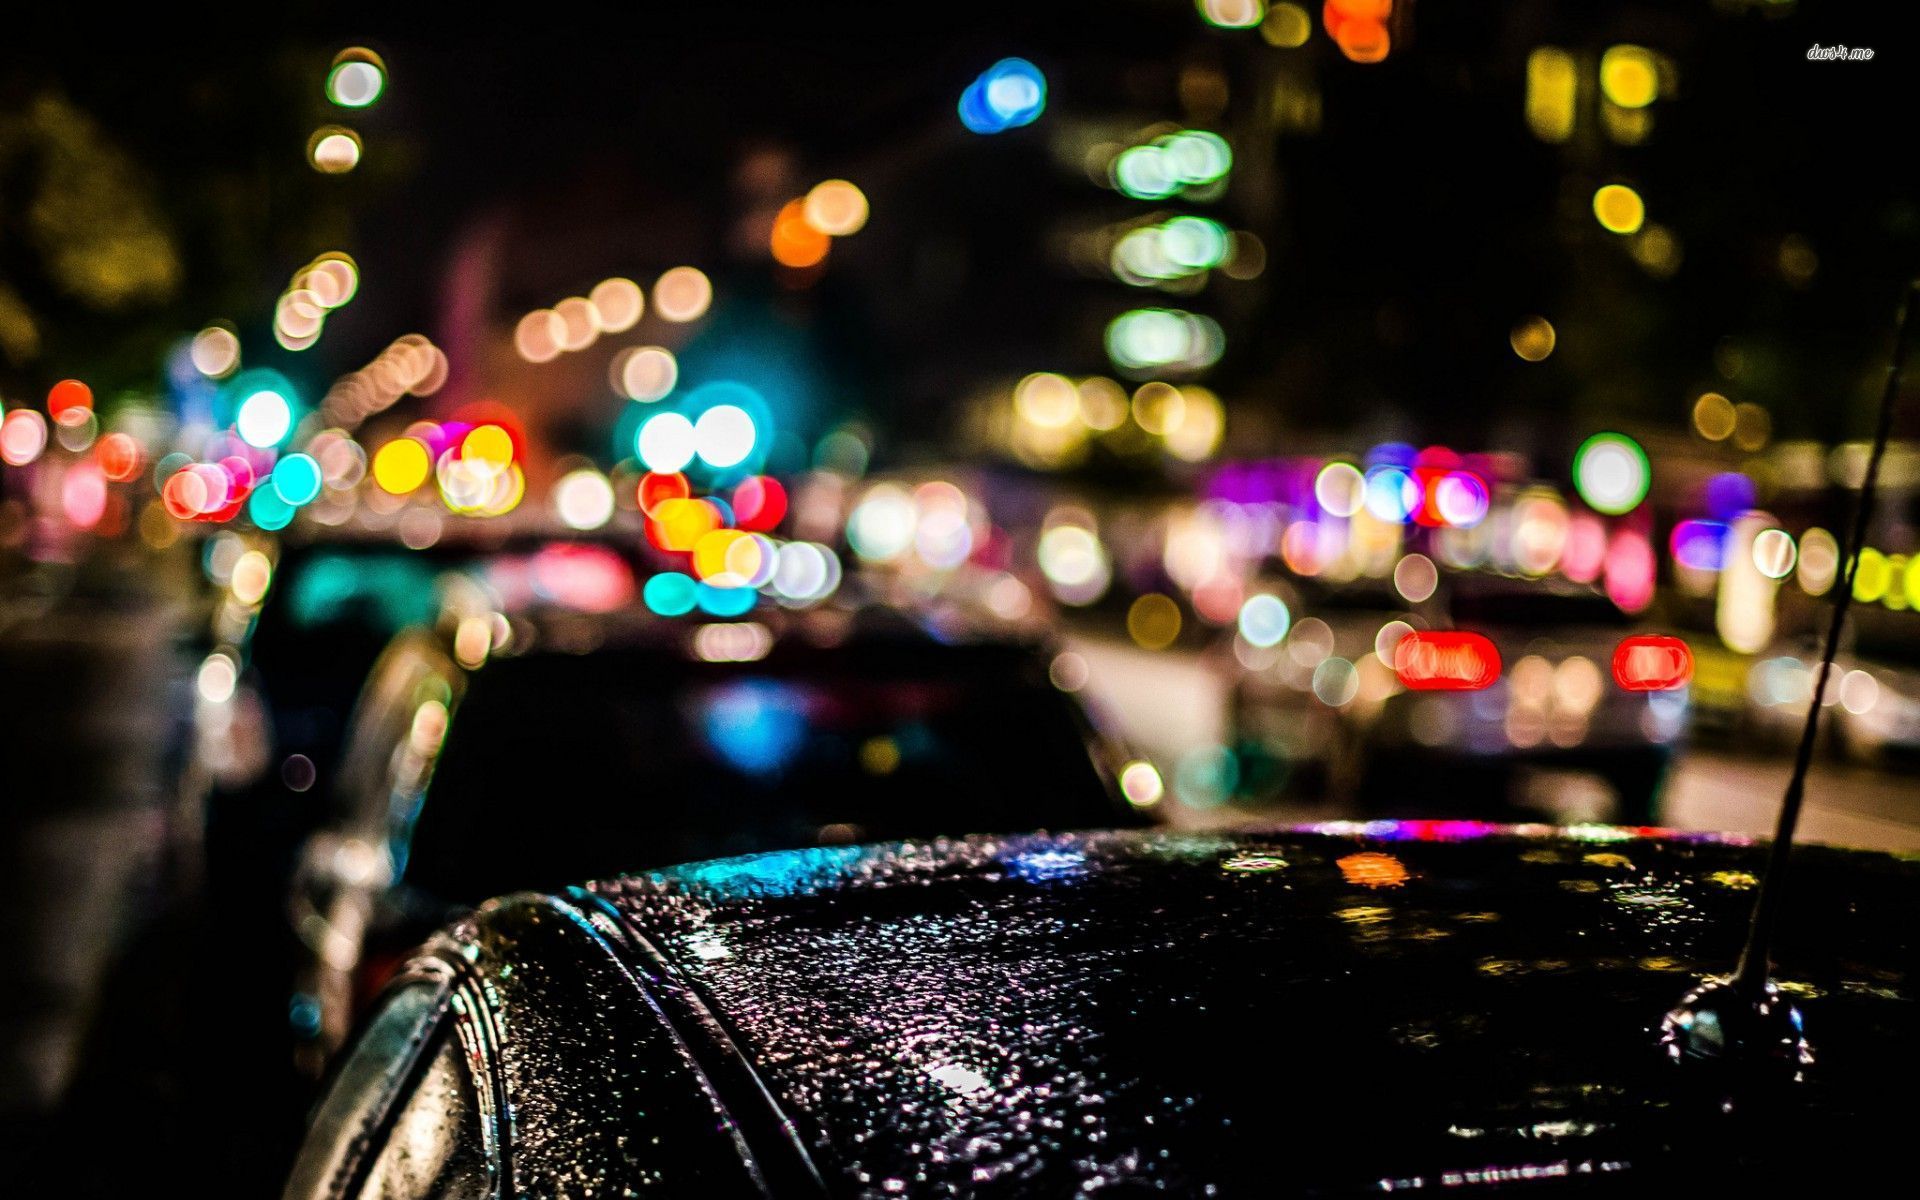 Blurred city lights over the cars wallpaper - Photography wallpapers ...